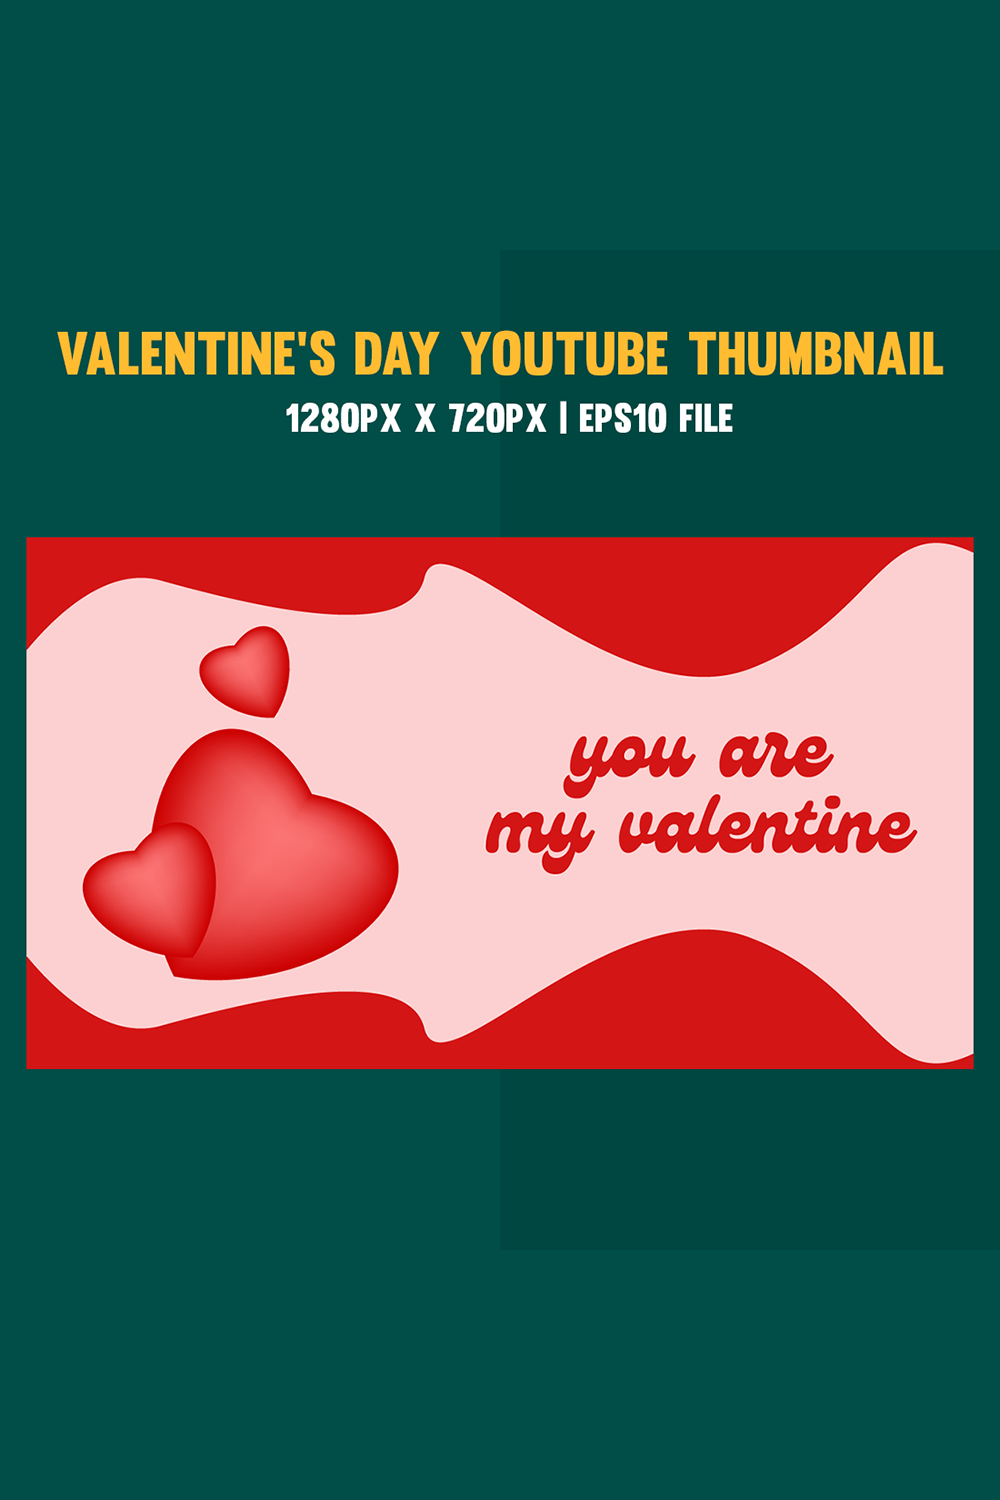 You are my valentine Valentines Day Youtube Thumbnail pinterest preview image.